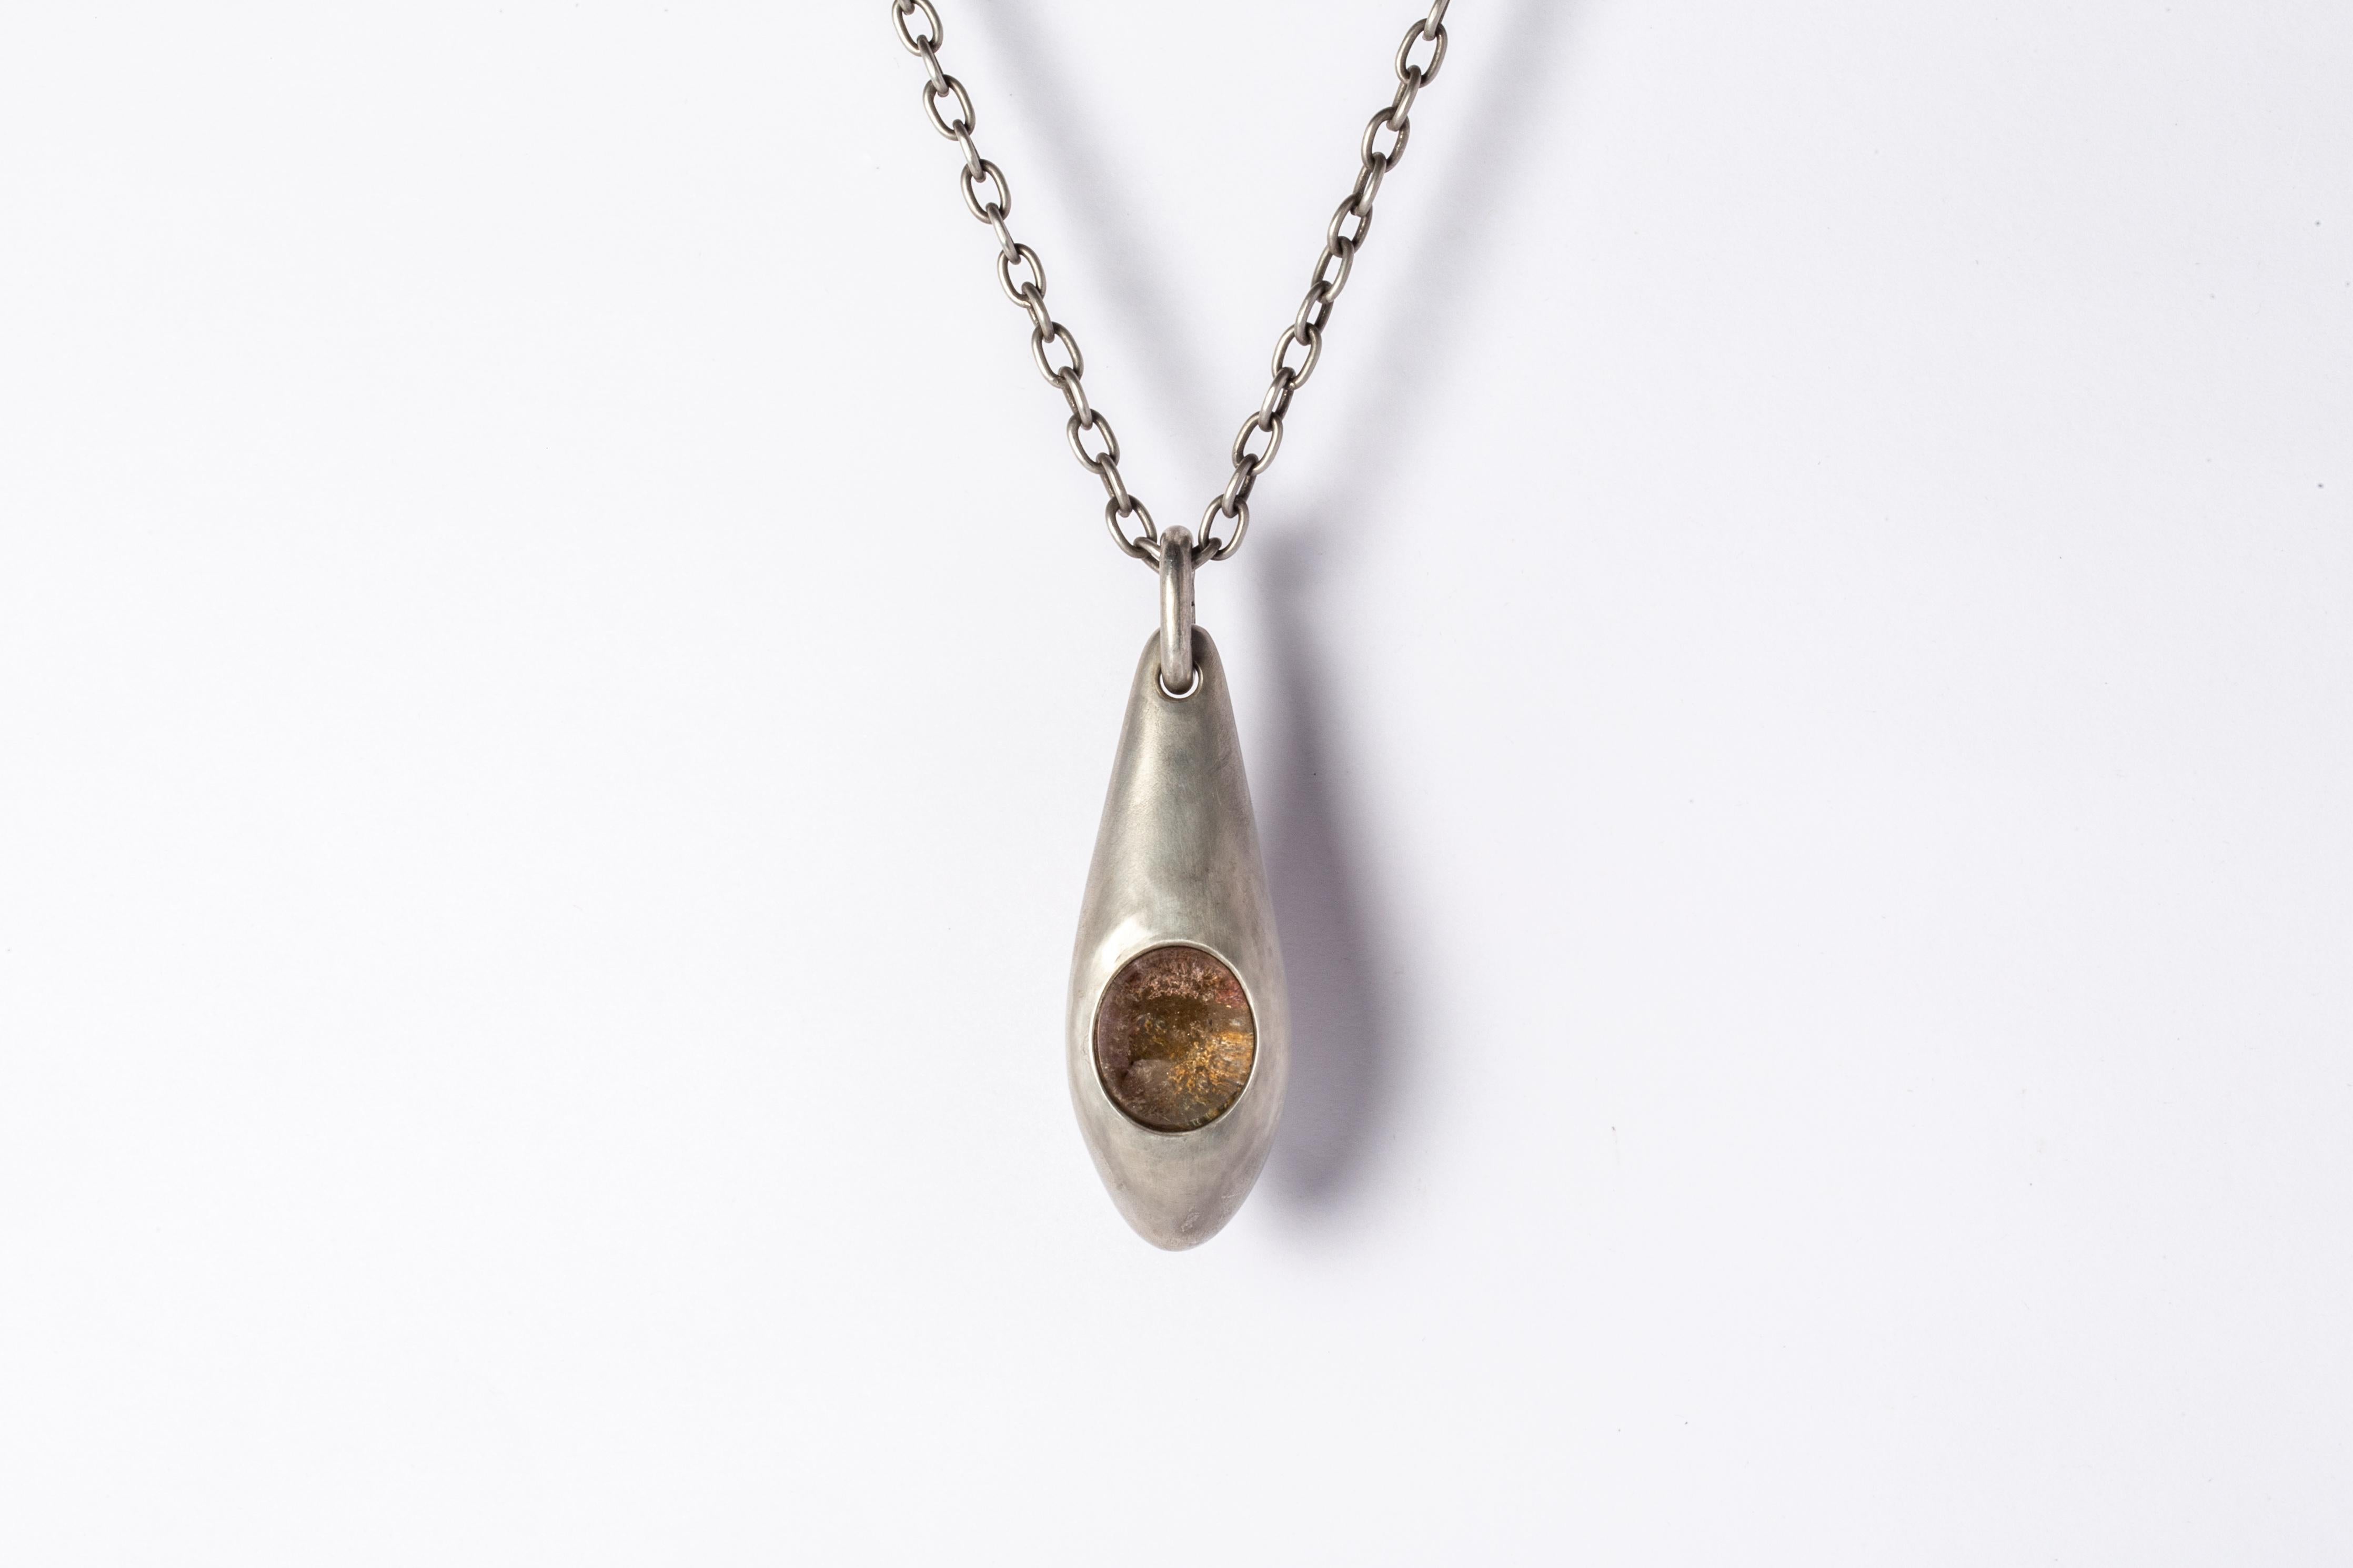 Necklace in acid treated sterling silver and a rough of garden quartz. It comes on 74 cm sterling silver chain.